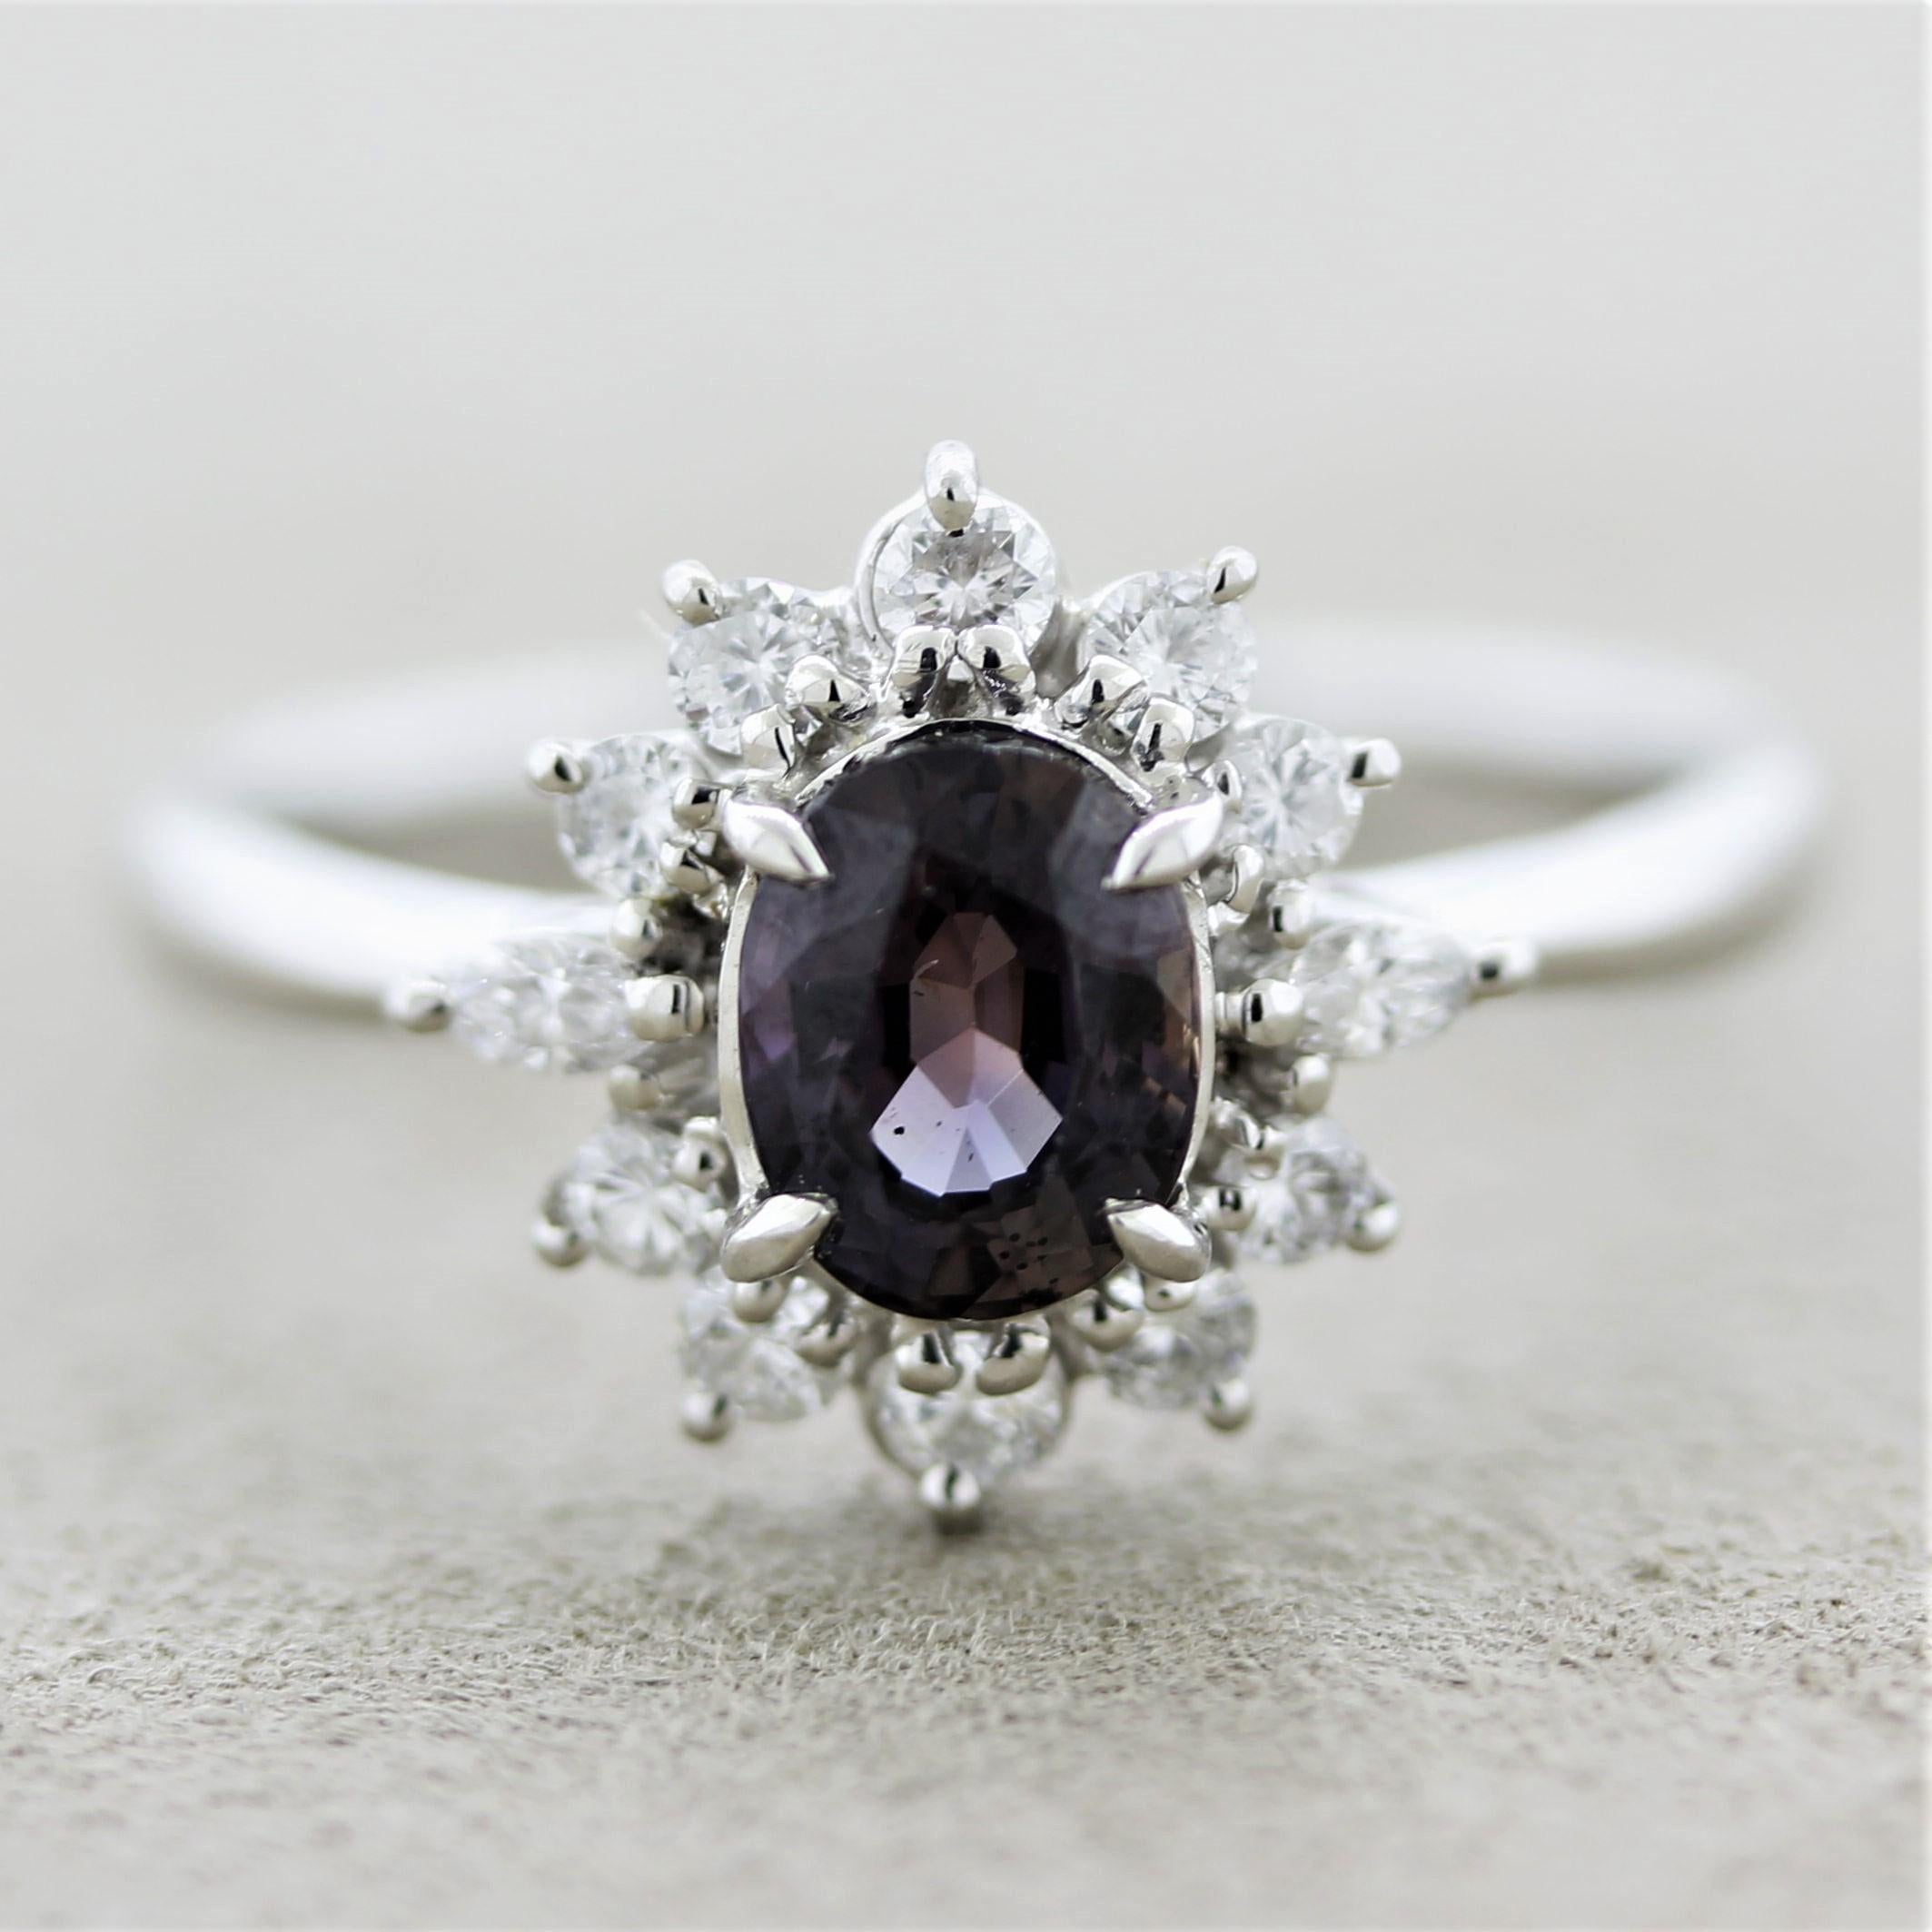 A mesmerizing and rare alexandrite, weighing 1.18 carats, takes center stage of this platinum made ring. The alexandrite has an oval-shape along with great color-change as the color changes from a greenish to a purplish color in different light